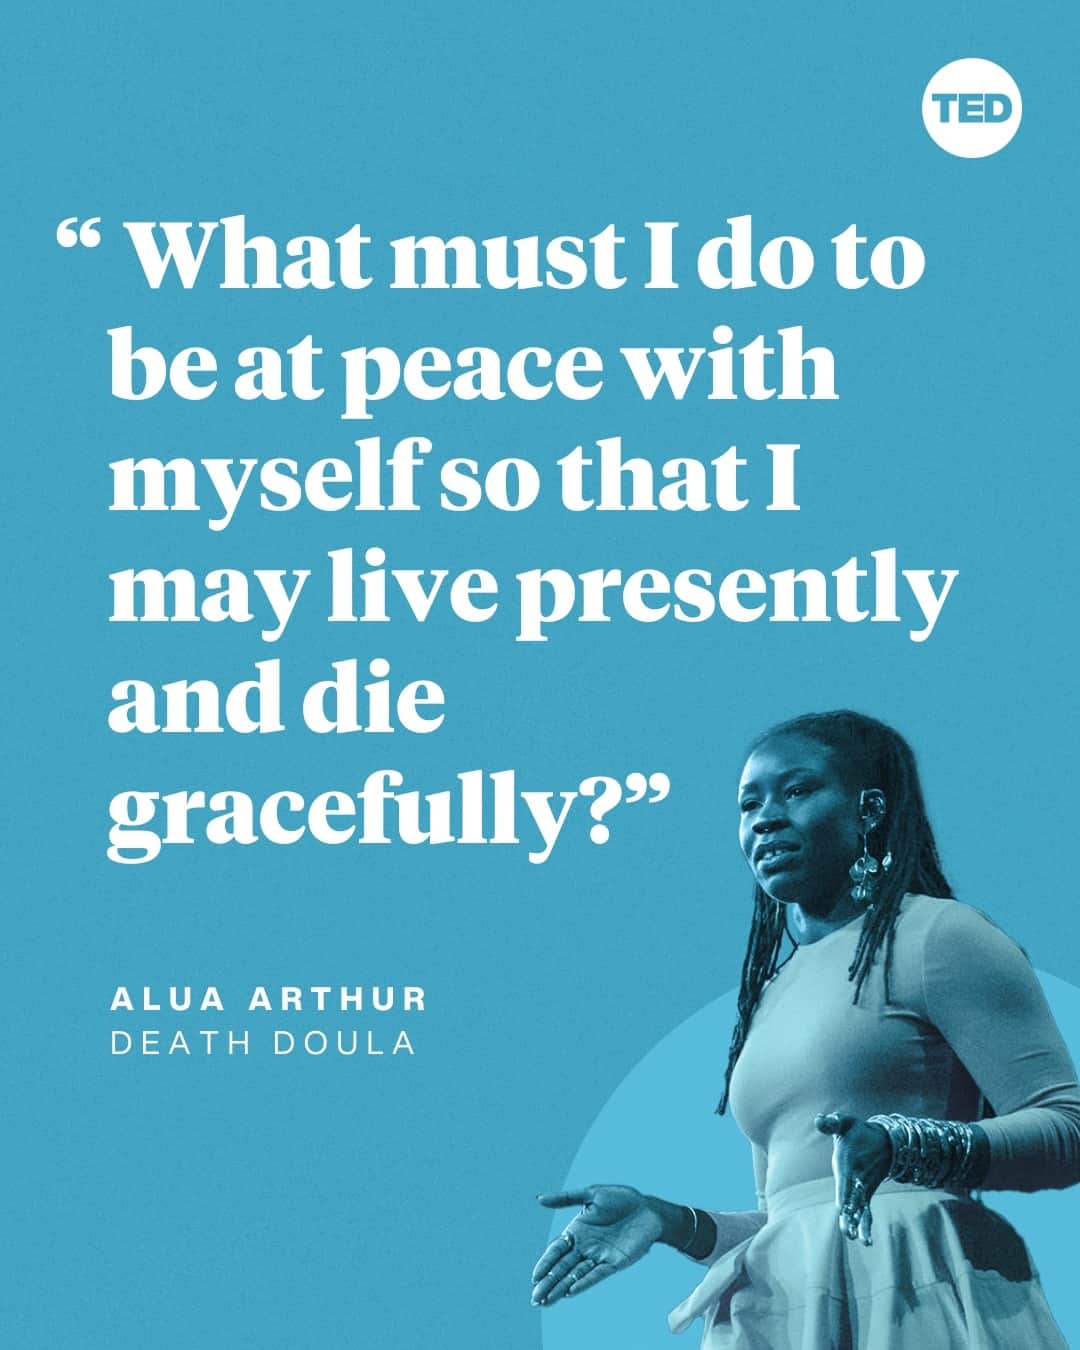 TED Talksのインスタグラム：「How often do you think about your own death? If your answer is never, death doula and founder of @going_with_grace, Alua Arthur (@alualoveslife), is here to change your mind. In this profound TED Talk, she shares stories from her experience supporting dying people through their end-of-life transitions and what it taught her about our brief, imperfect time as humans on this planet. Want to challenge yourself to think about your own life through the lens of death? Arthur says to start with this question: “What must I do to be at peace with myself so that I may live presently and die gracefully?” Visit the link in our bio to watch the full talk.」